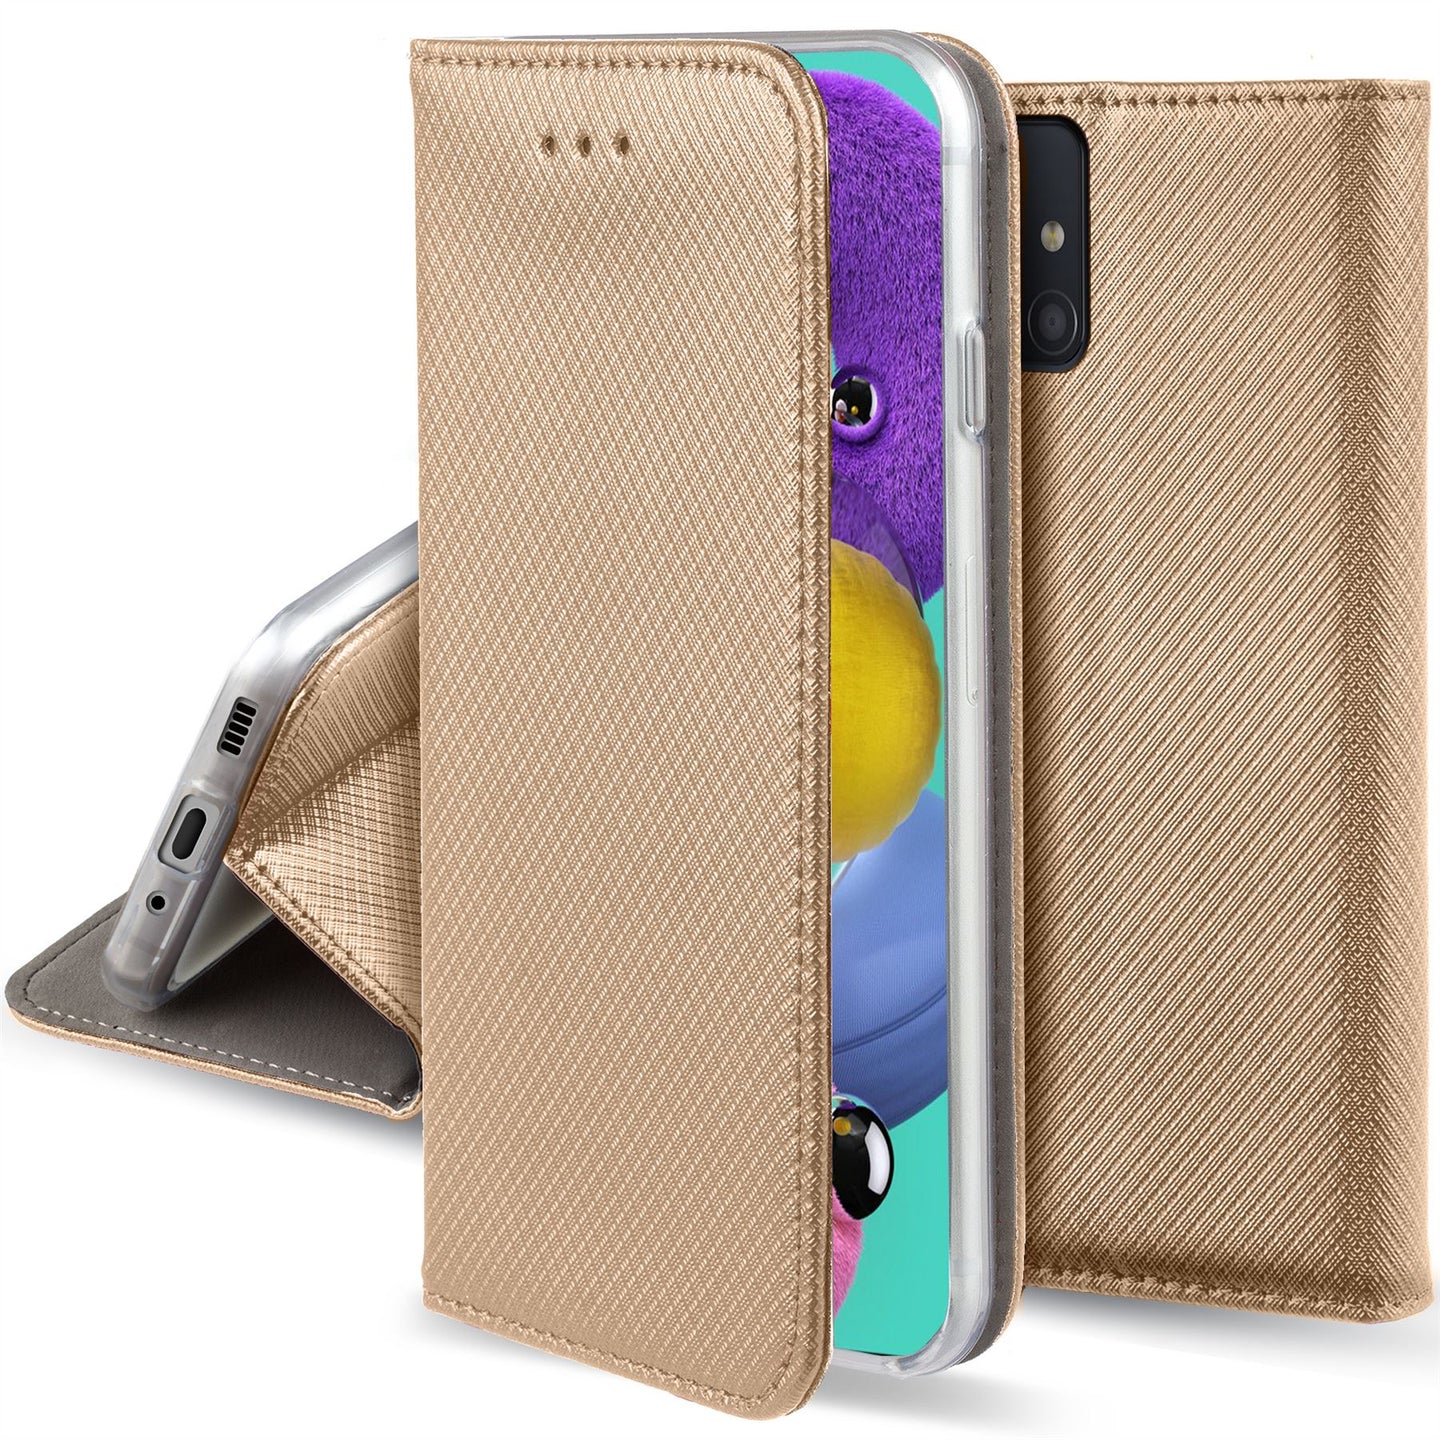 Moozy Case Flip Cover for Samsung A51, Gold - Smart Magnetic Flip Case with Card Holder and Stand